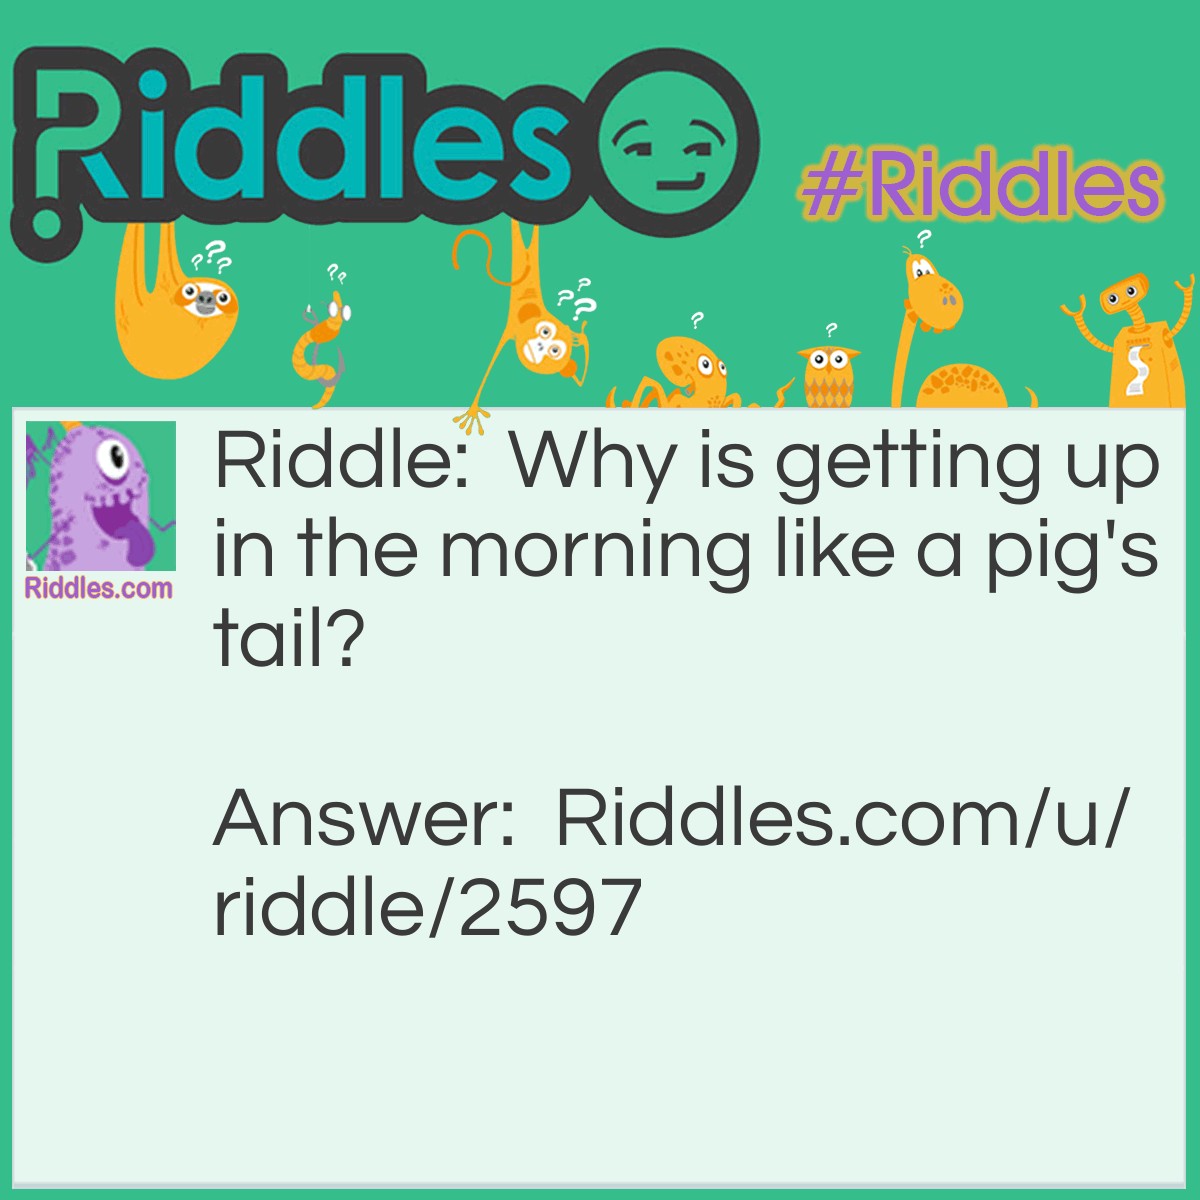 Riddle: Why is getting up in the morning like a pig's tail? Answer: Because it's twirly( too early).